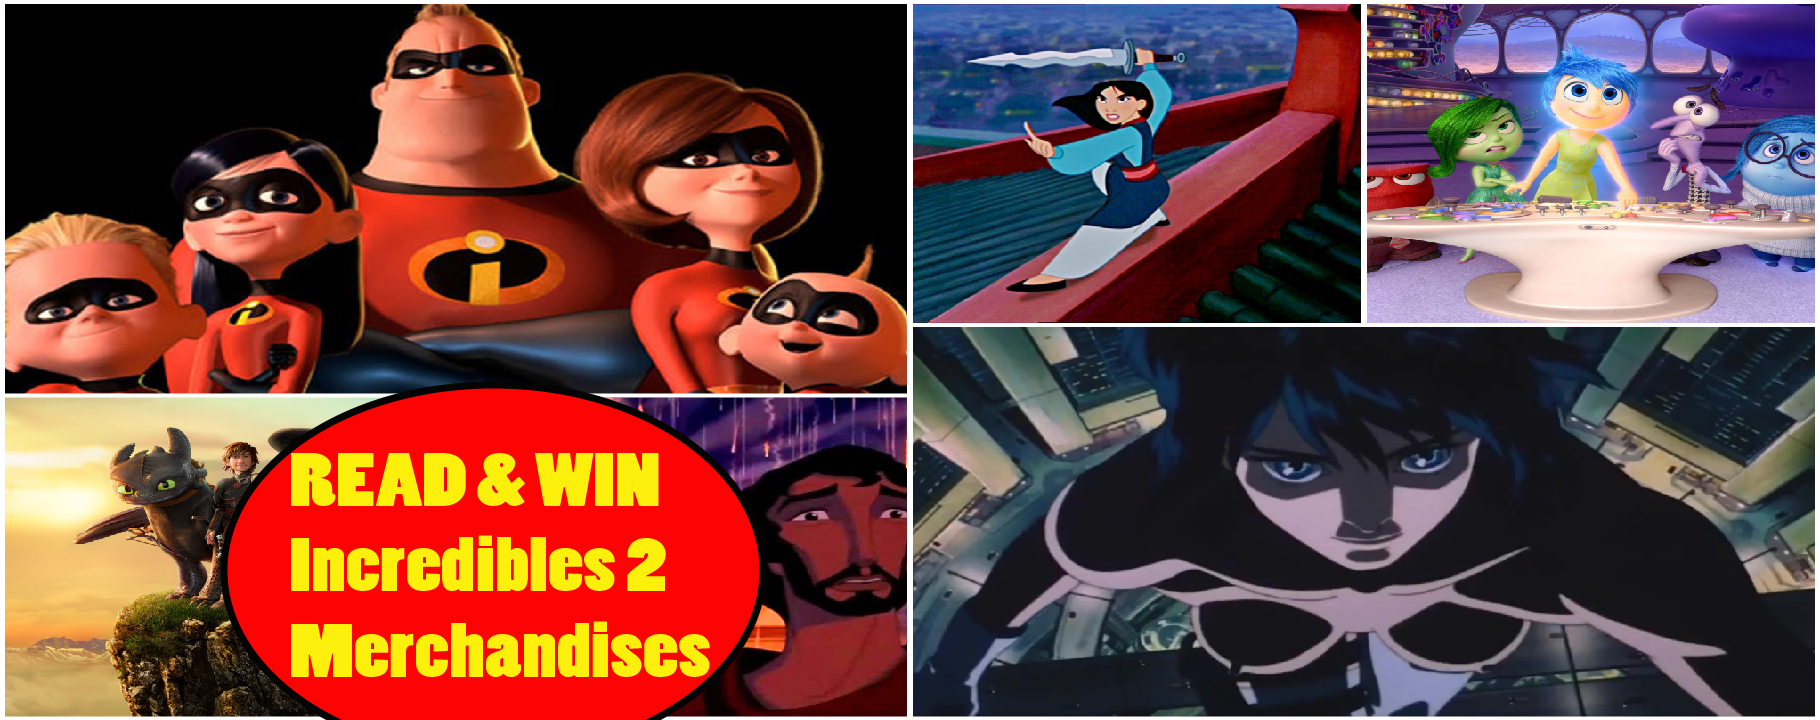 Top 10 Greatest Animated Movies Of All Time | Moviedash.com